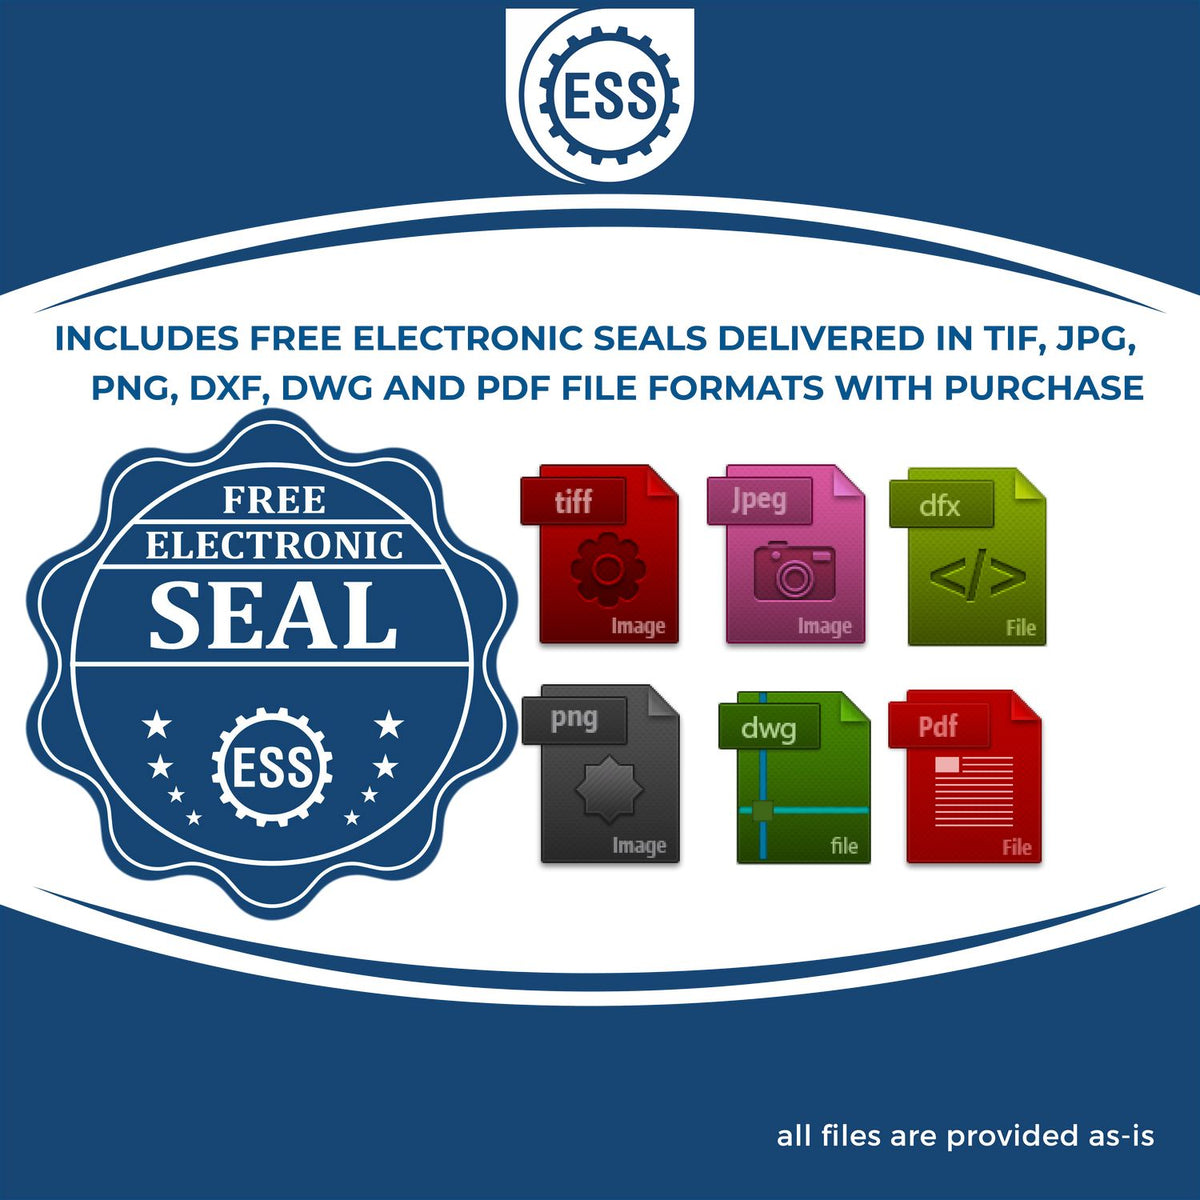 An infographic for the free electronic seal for the Premium MaxLight Pre-Inked Oklahoma Engineering Stamp illustrating the different file type icons such as DXF, DWG, TIF, JPG and PNG.